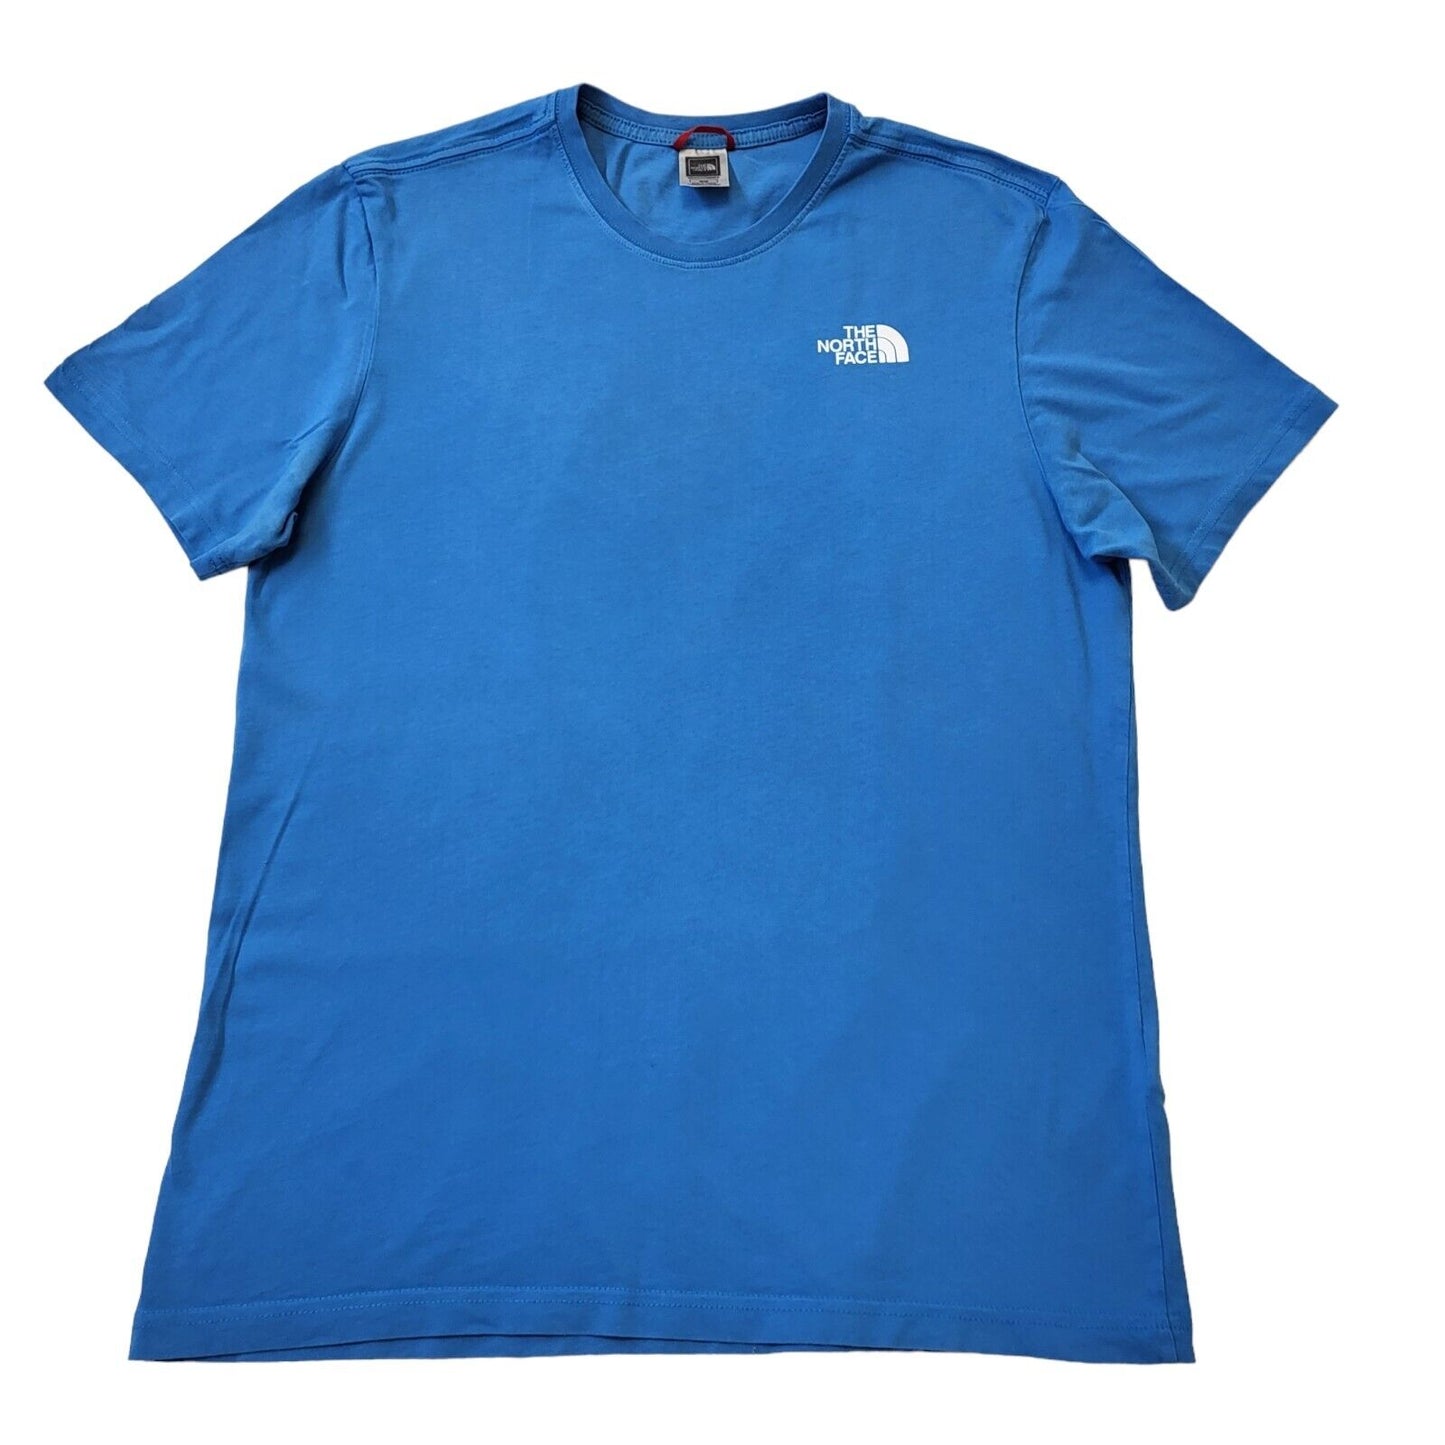 The North Face T-Shirt (M)